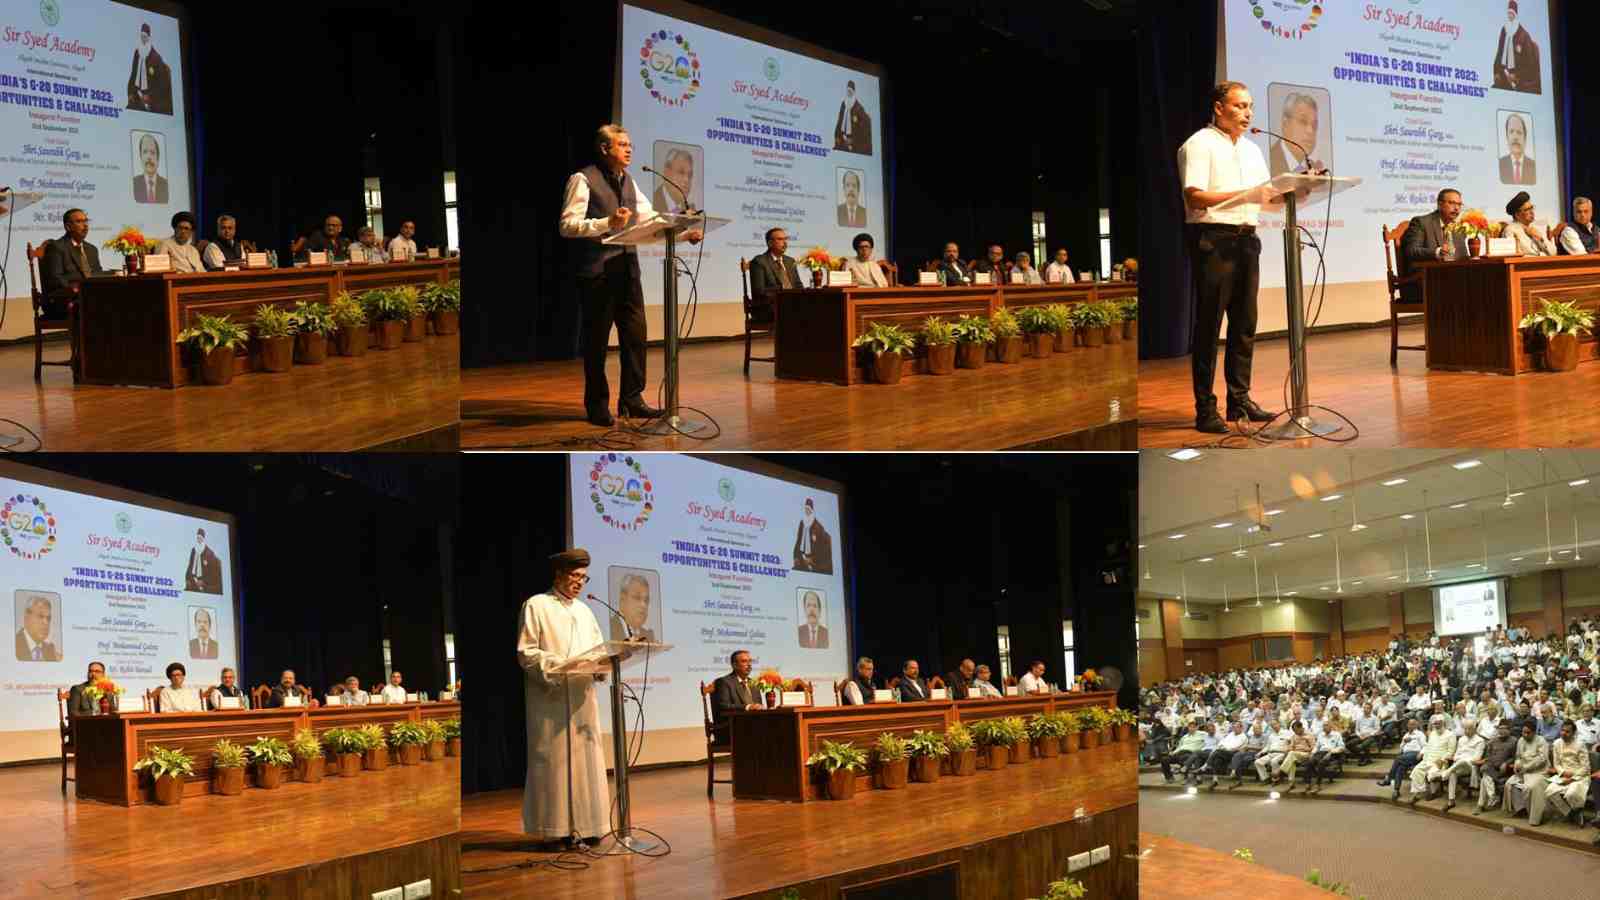 Sir Syed Academy Seminar on G20 Summit: Experts Highlight India's Development, Opportunities, And Challenges